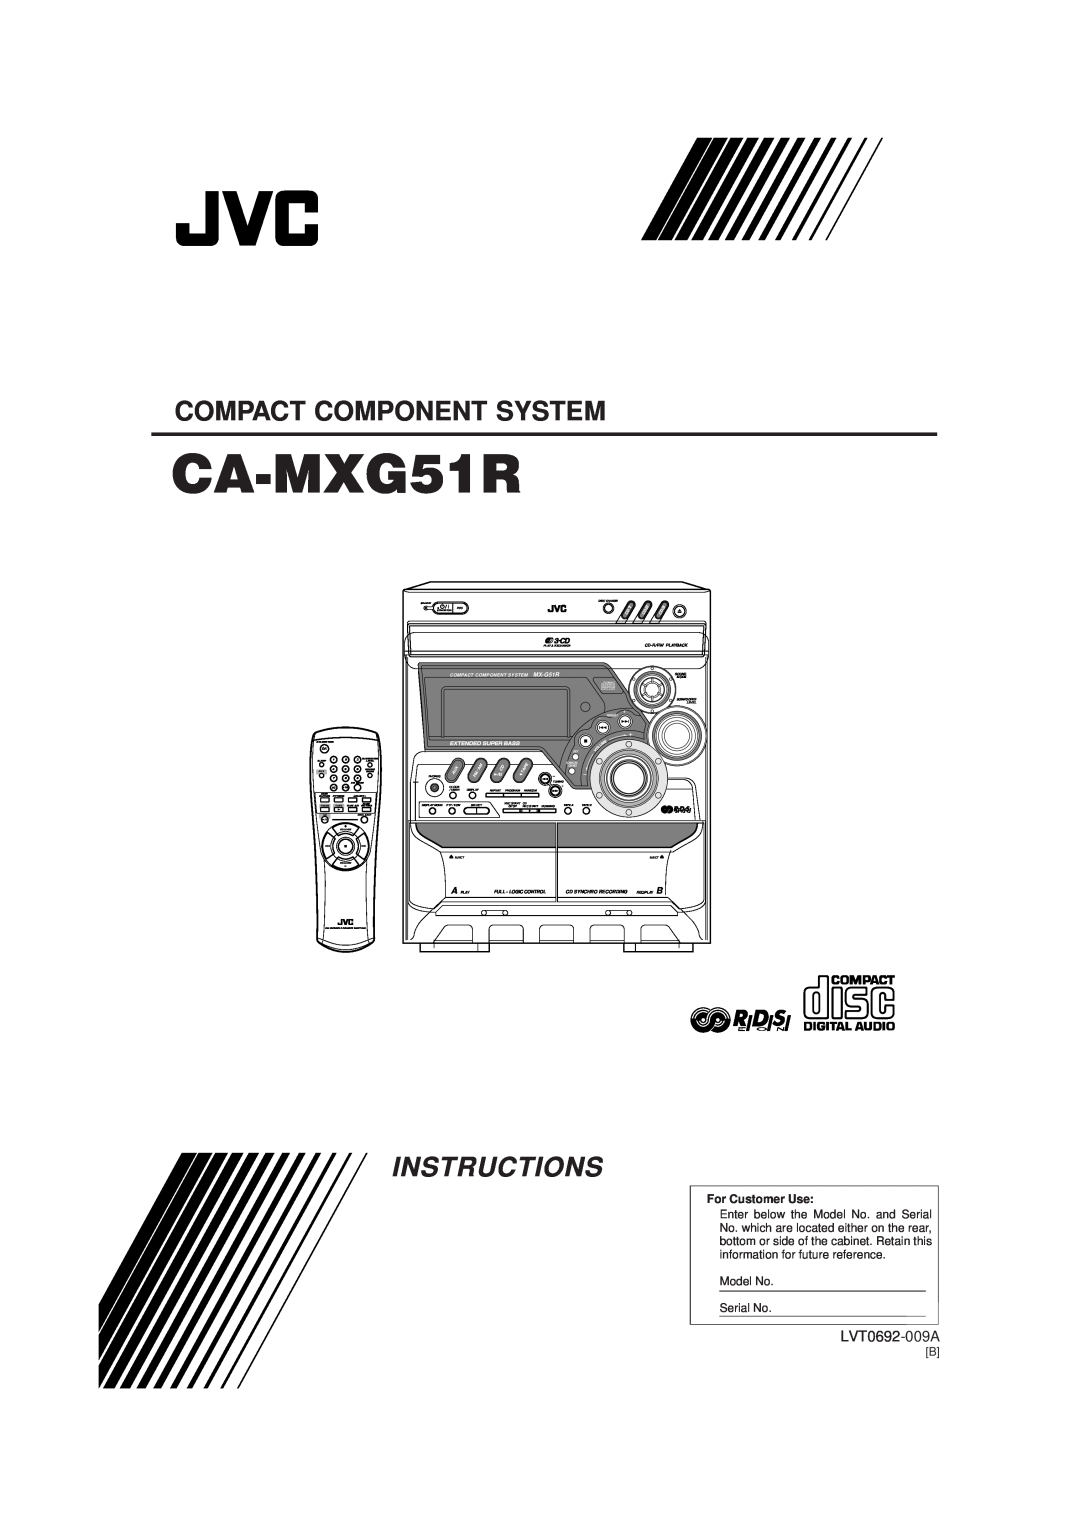 JVC CA-MXG51R manual Instructions, Compact Component System, LVT0692-009A, For Customer Use, Cd-R/Rwplayback, Preset 